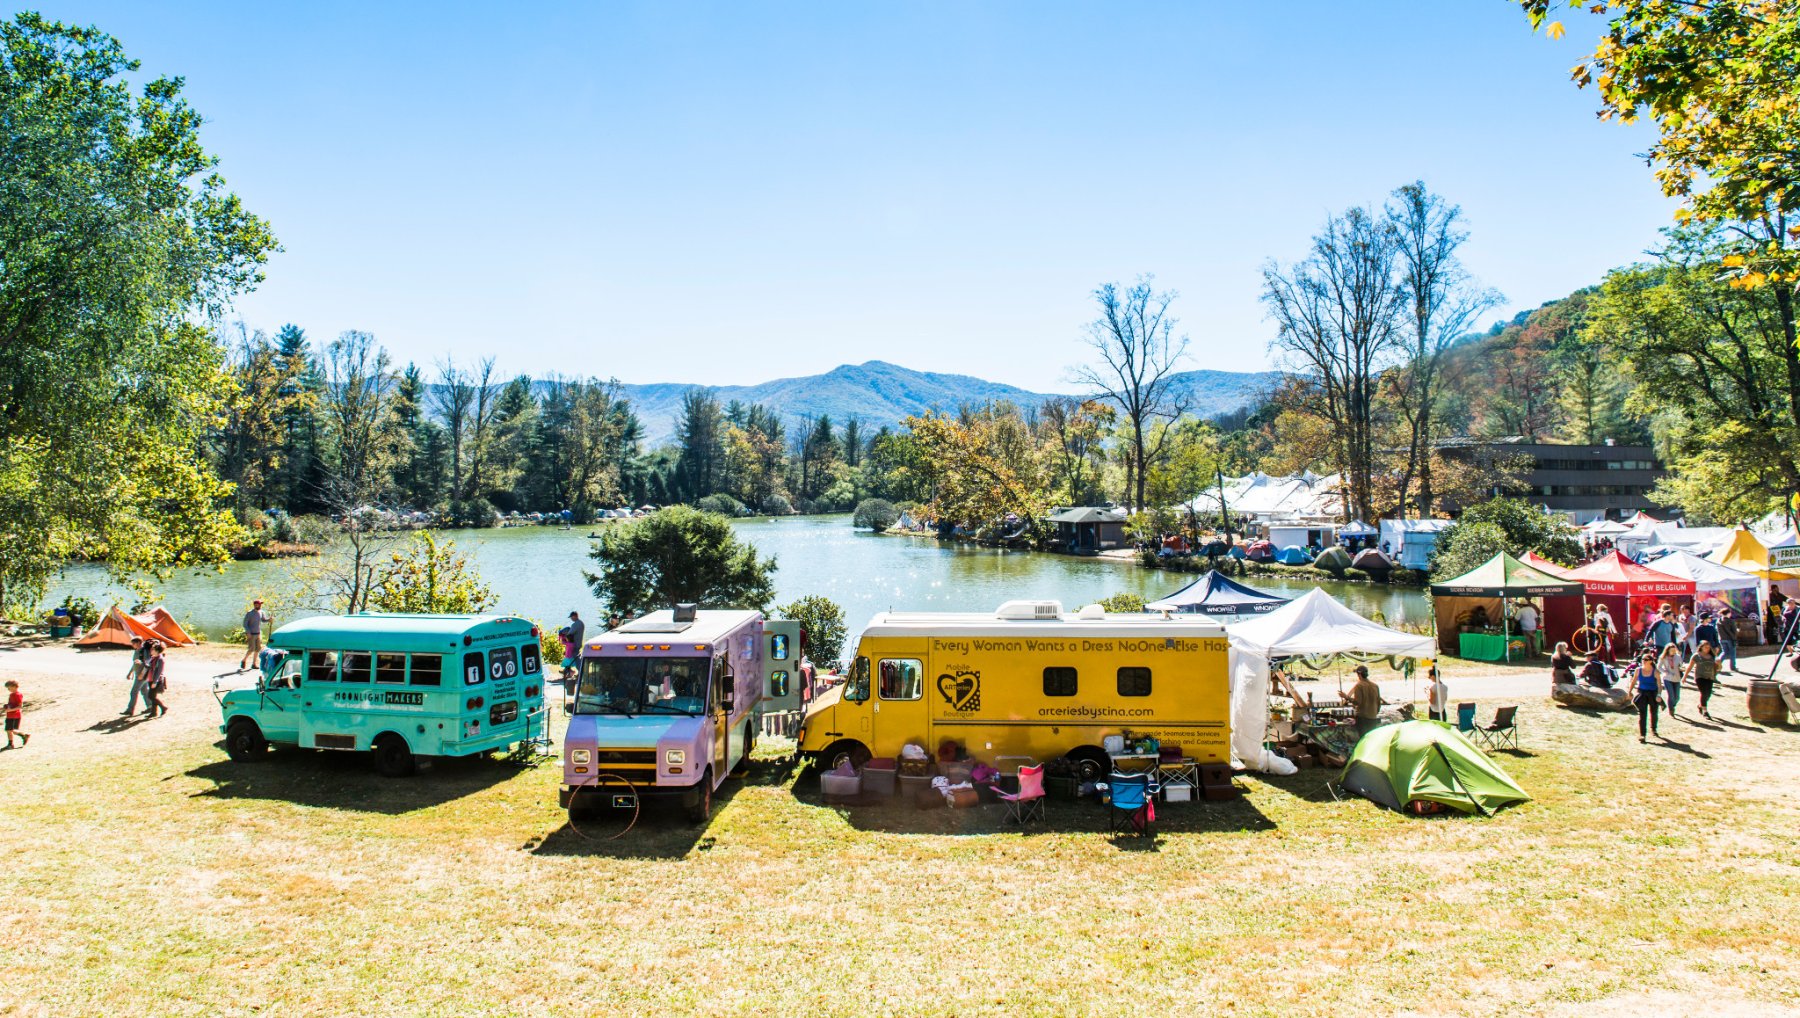 Colorful food trucks and festival vendors set up around lake with fall foliage and mountains in background